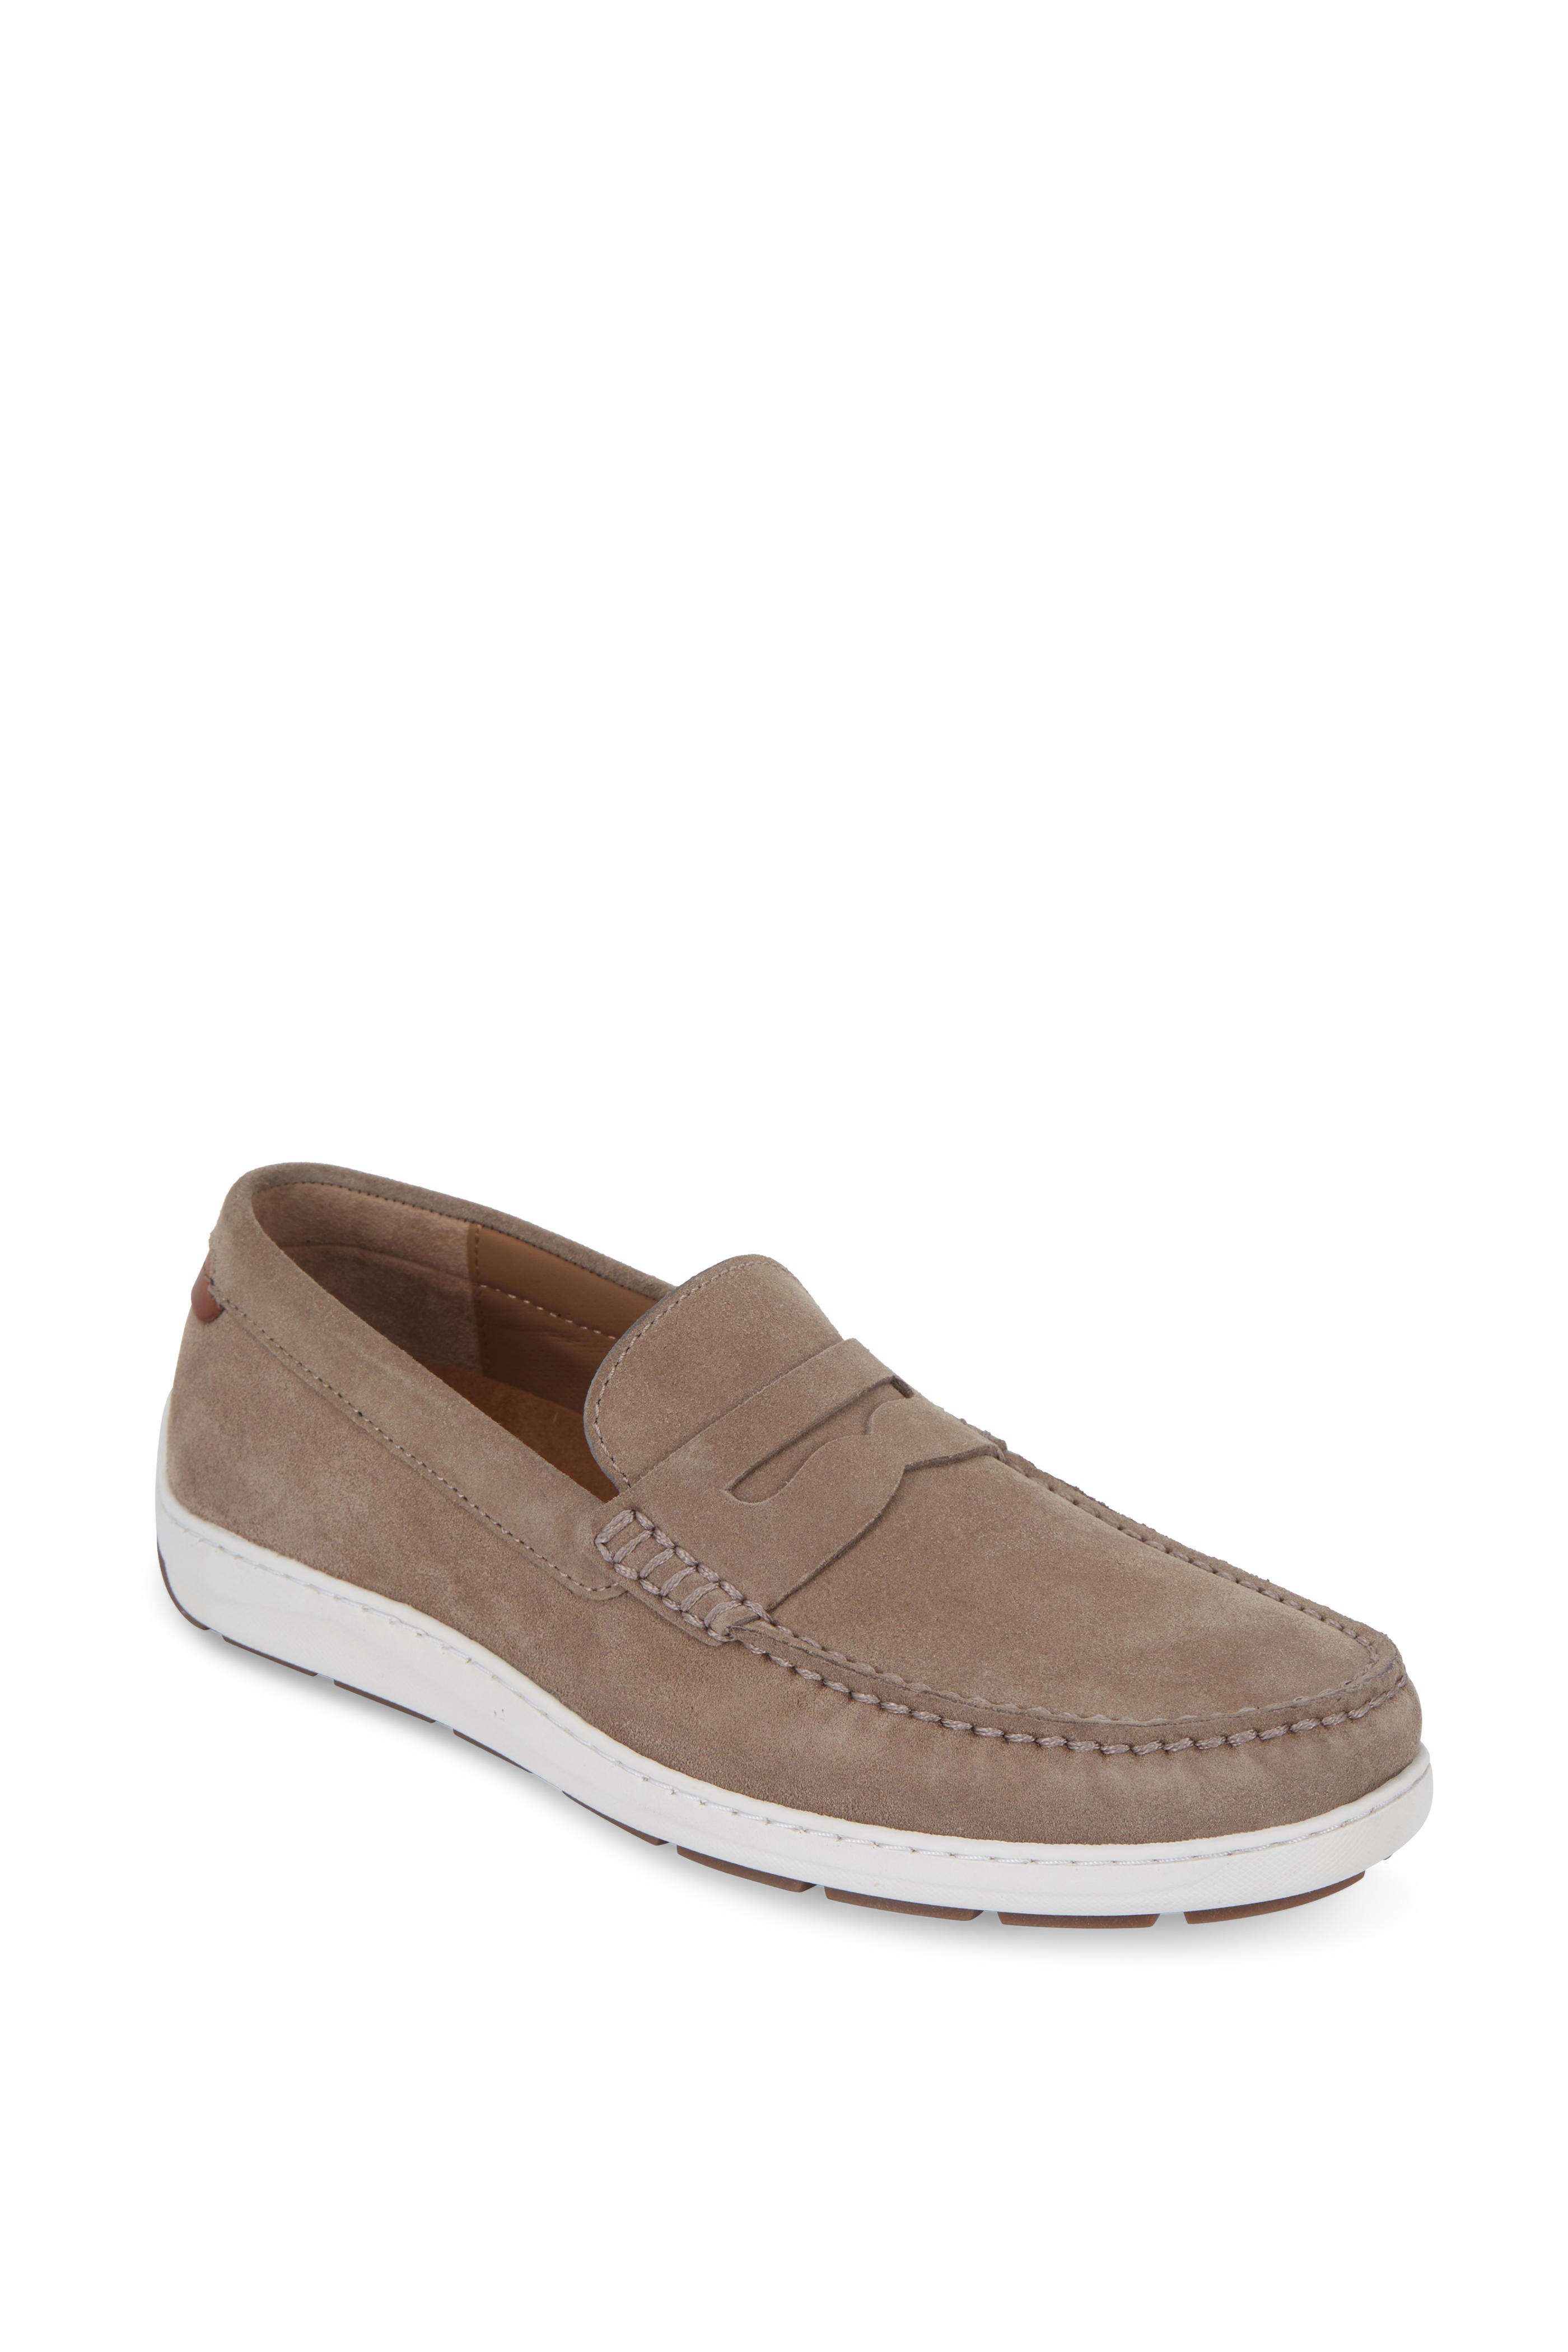 Trask - Sheldon Taupe Suede Penny Loafer | Mitchell Stores